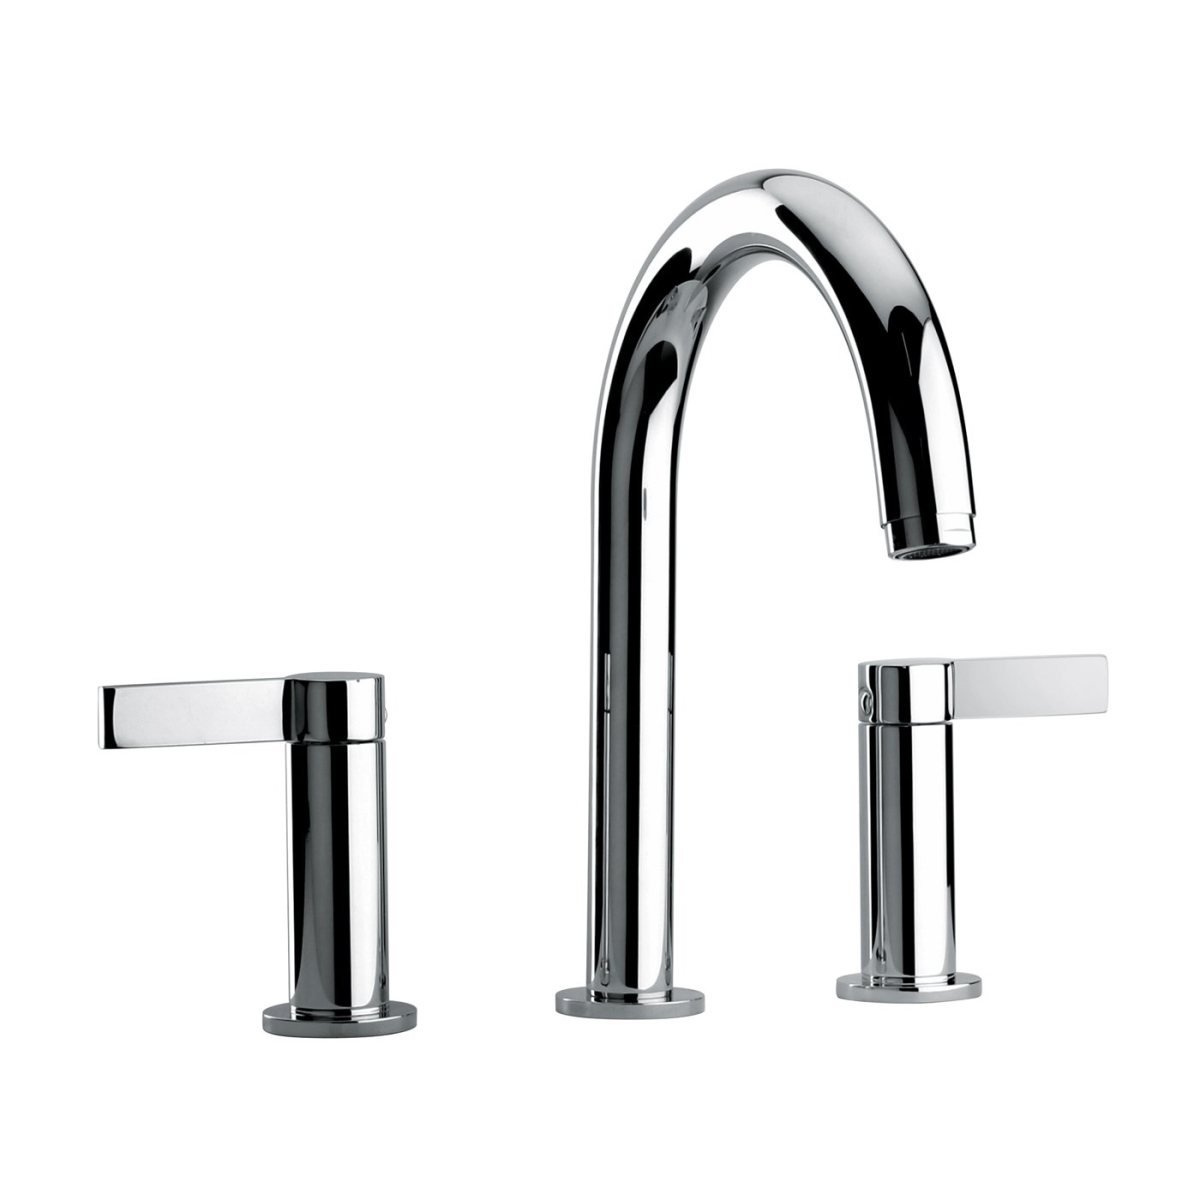 14214-30 Faucets Two Lever Handle Widespread Lavatory Faucet With Classic Spout, Matte Gray Finish Model